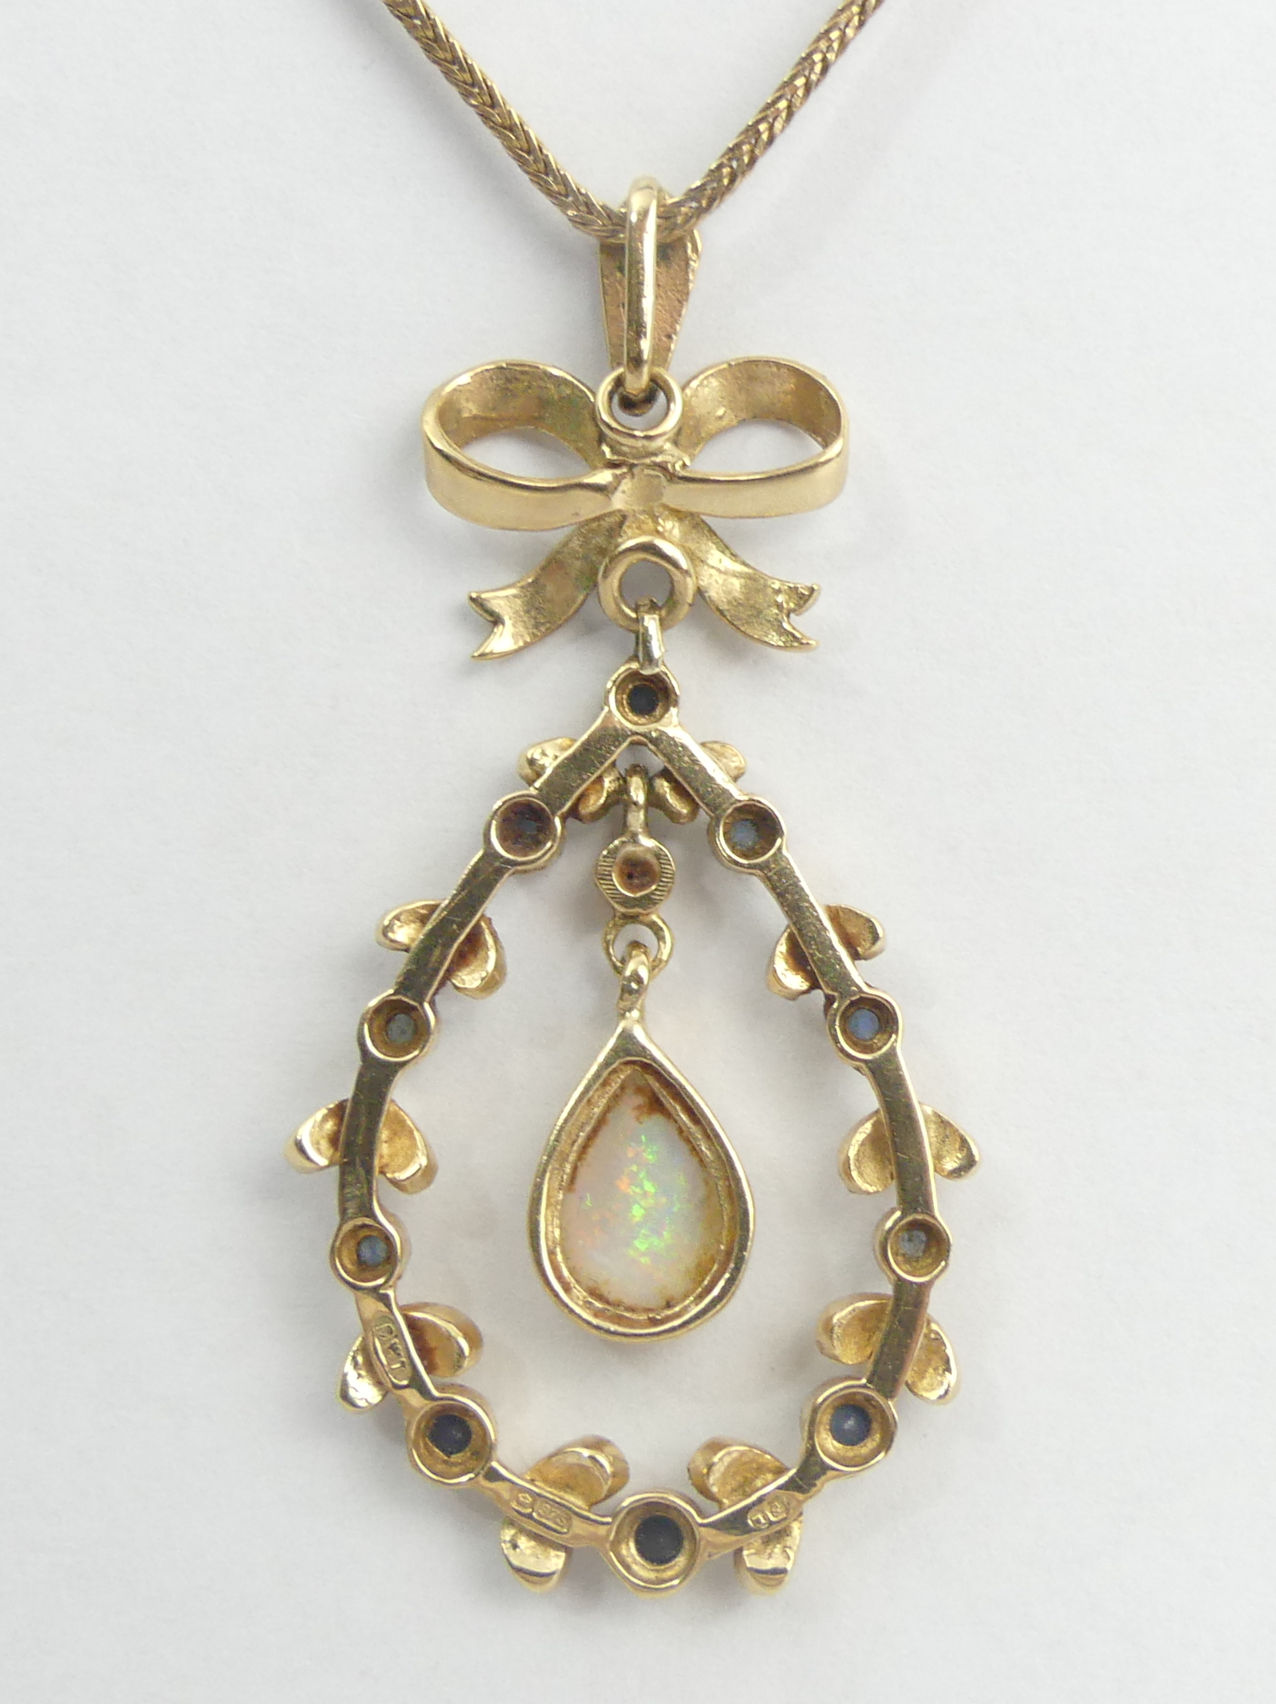 9ct gold sapphire and opal pendant and chain, 88 grams. Pendant 47 mm, chain 50 cm. UK Postage £12. - Image 4 of 5